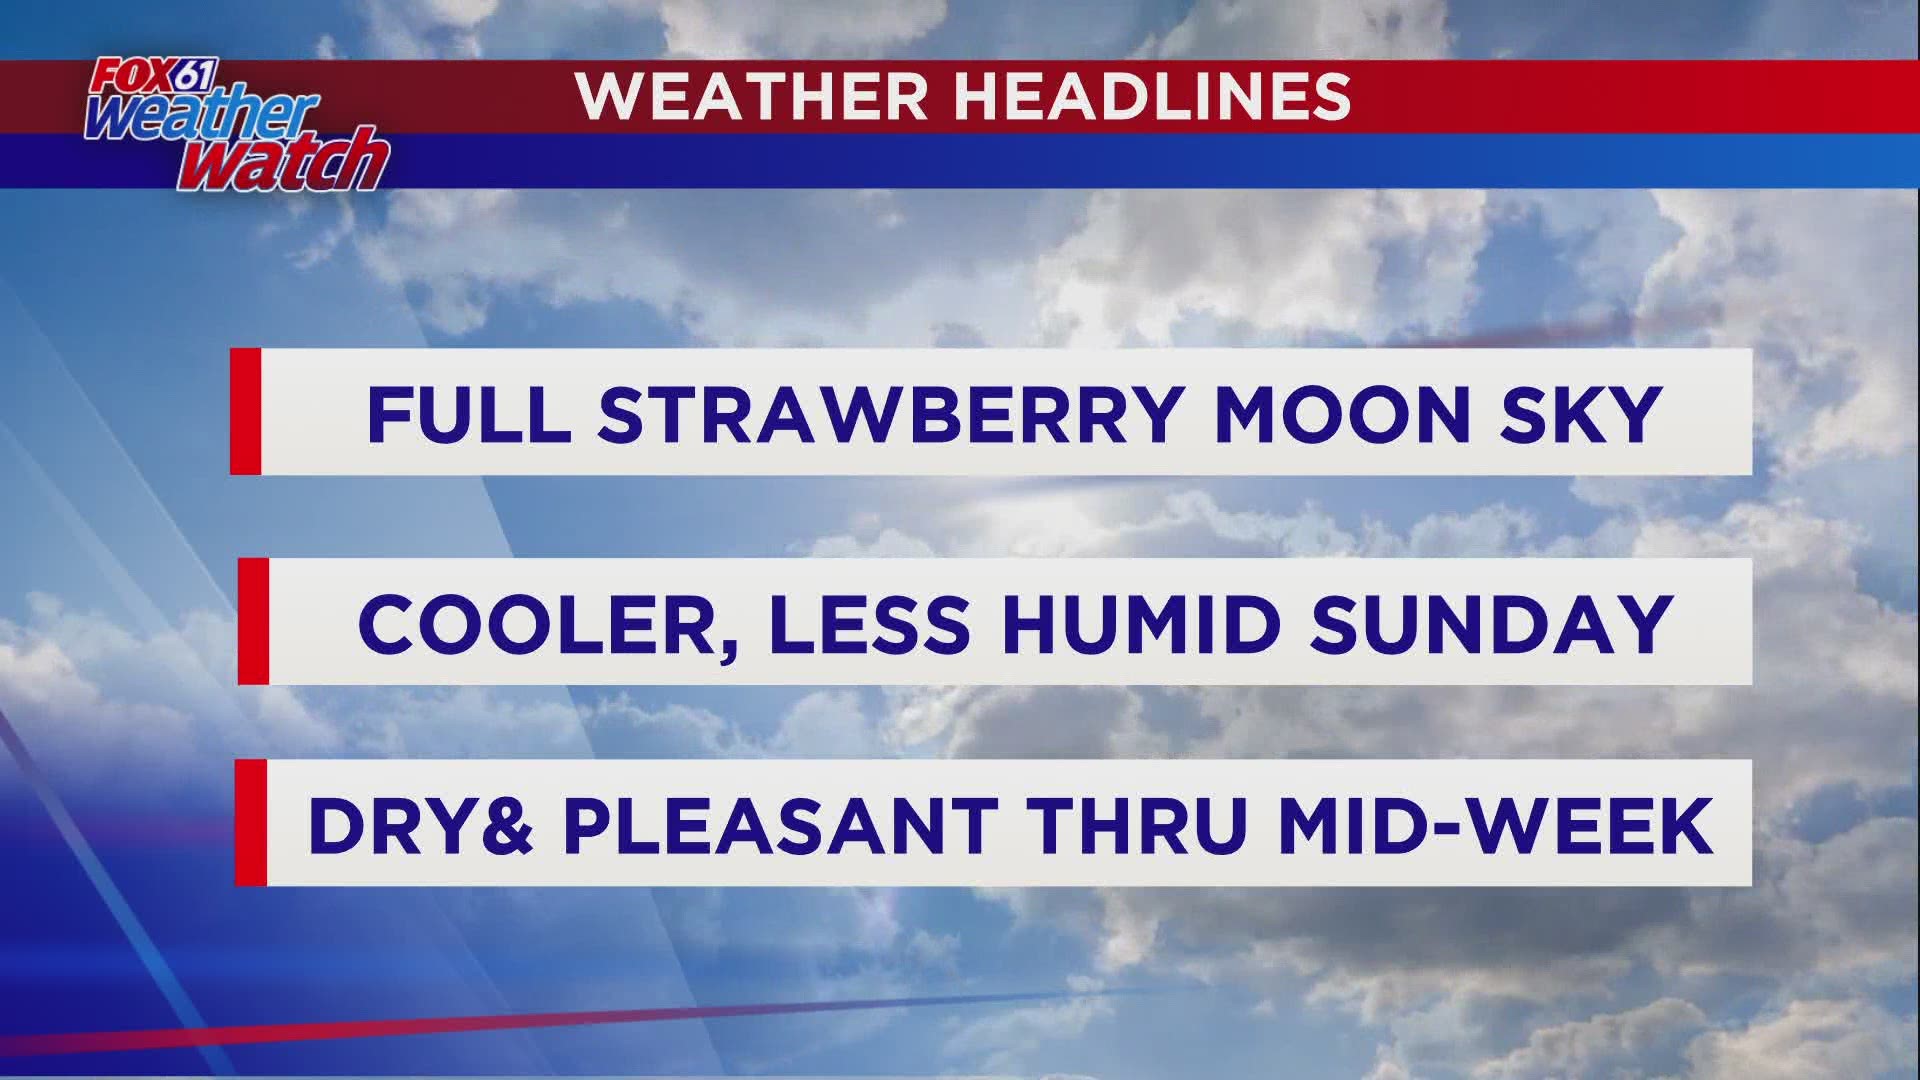 Sunday will be cooler and less humid